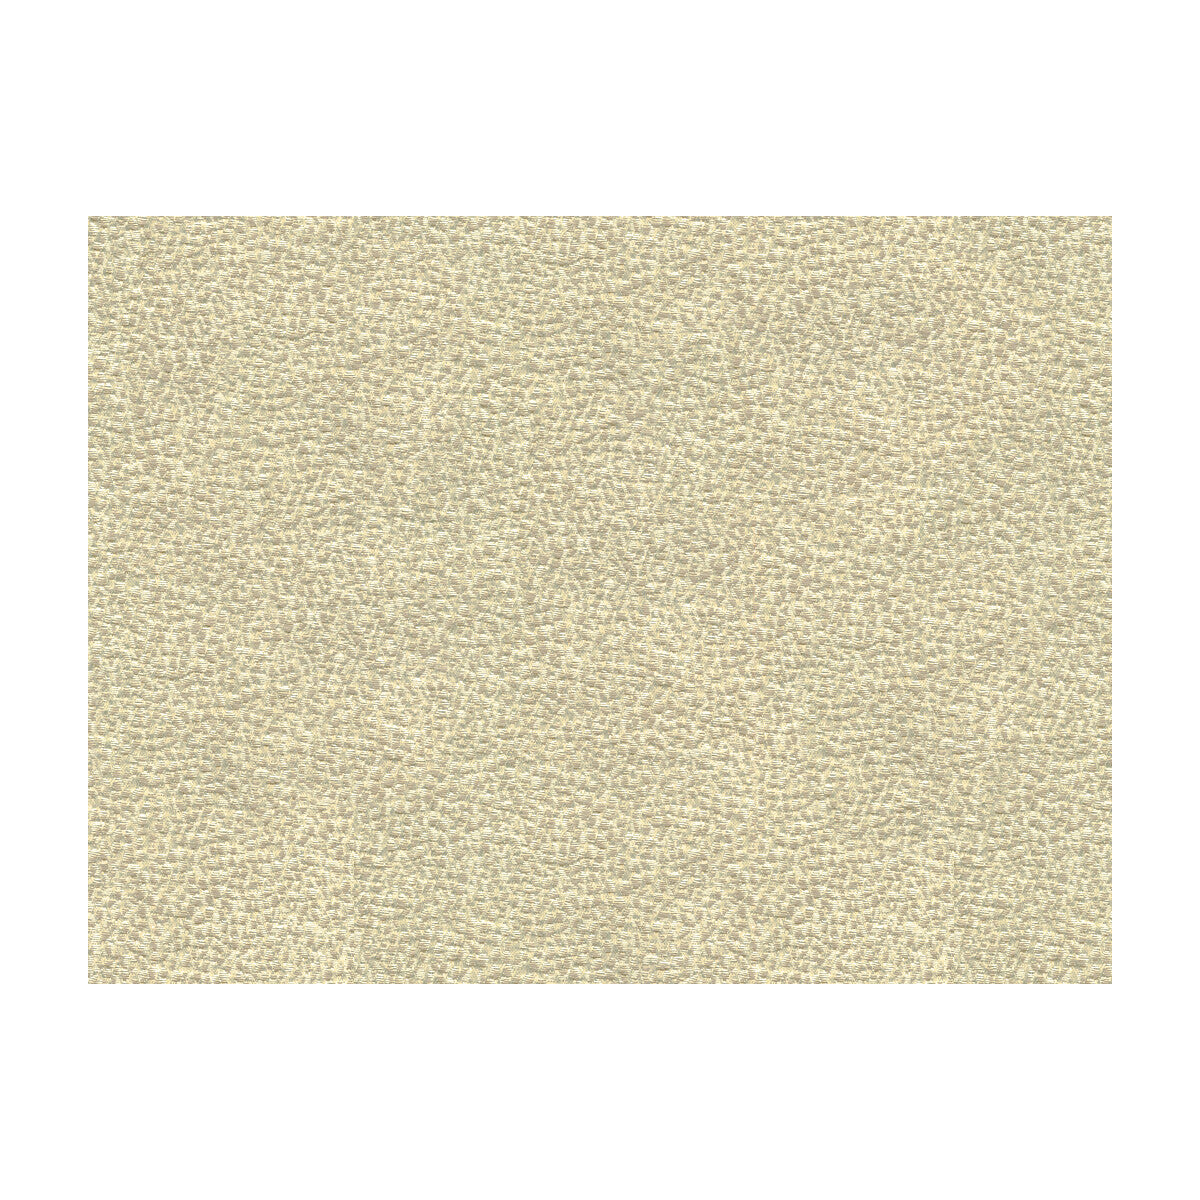 Shagreen Luxury fabric in platinum color - pattern 33456.11.0 - by Kravet Couture in the Modern Luxe collection